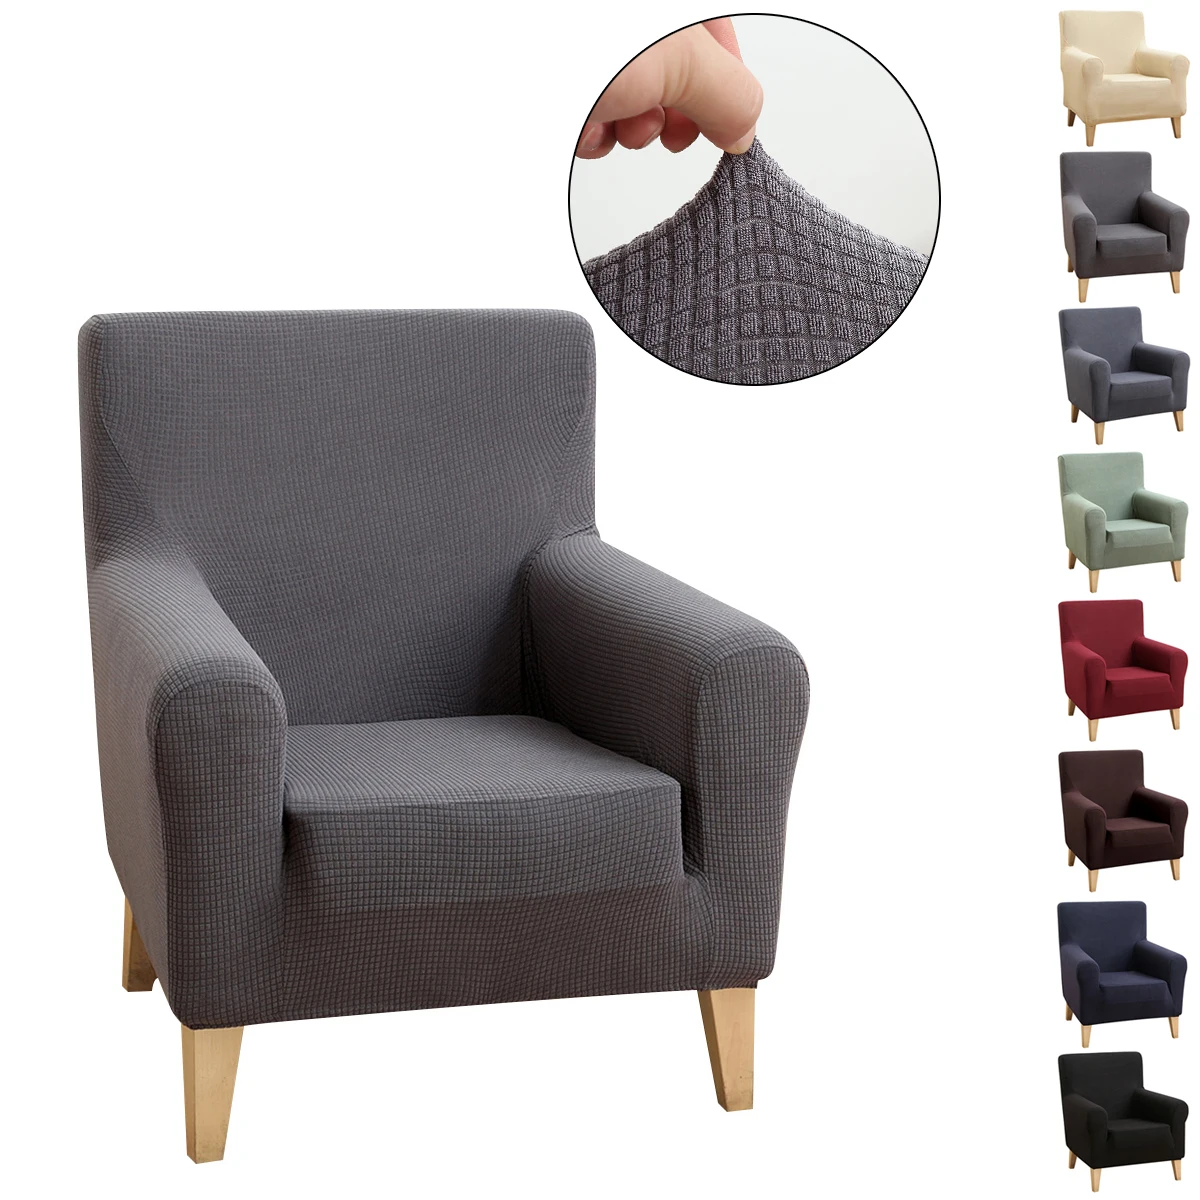 Home Comfortable Elastic Waterproof Couch Arm Chair Covers Furniture Protector Stretchy Armrest Covers Black PU Leather Arm Caps for Armchairs Sofa Chair Couch Stretchy Arm Slipcovers 